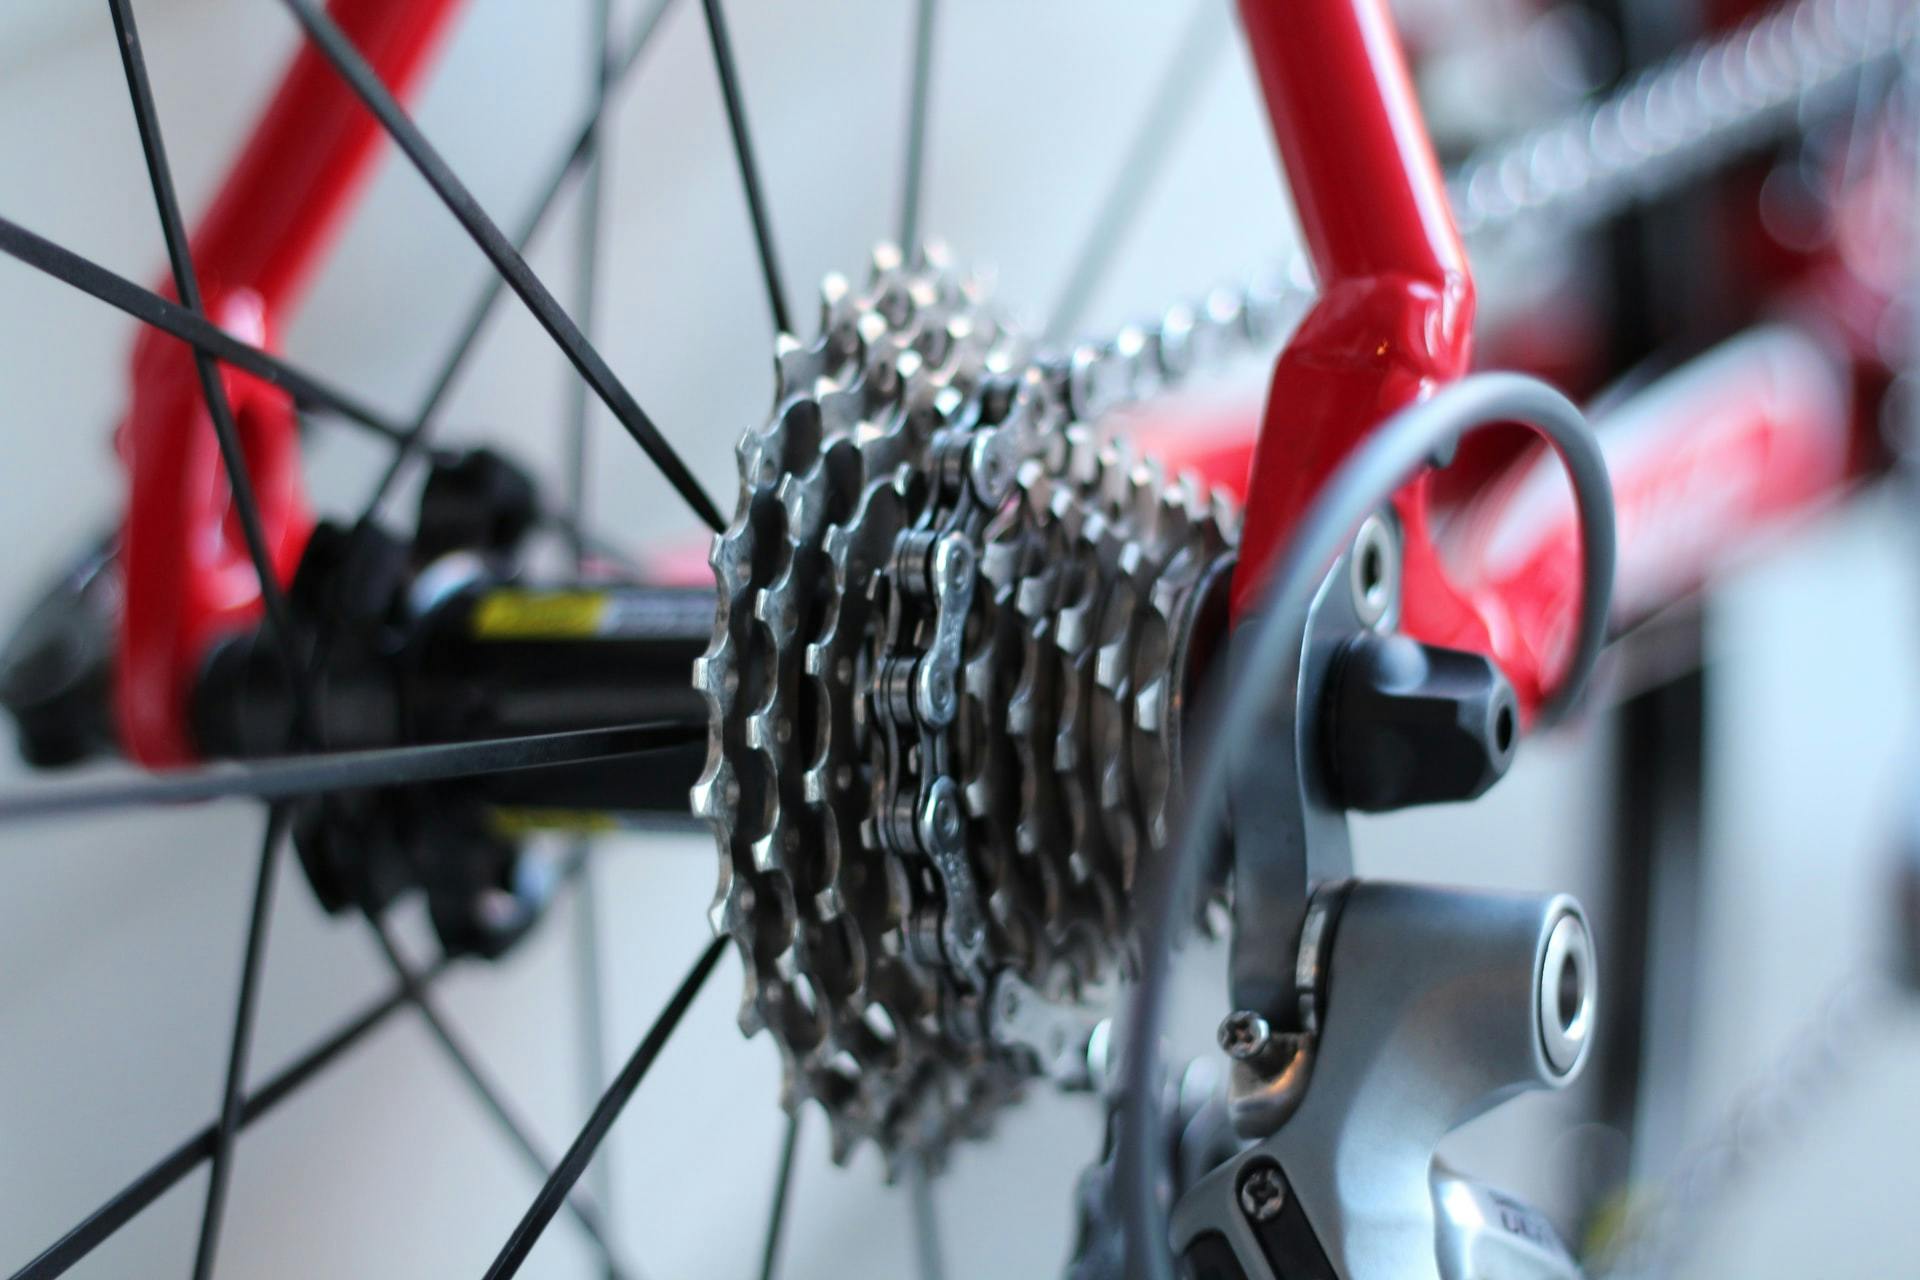 Wheel and gears of bicycle